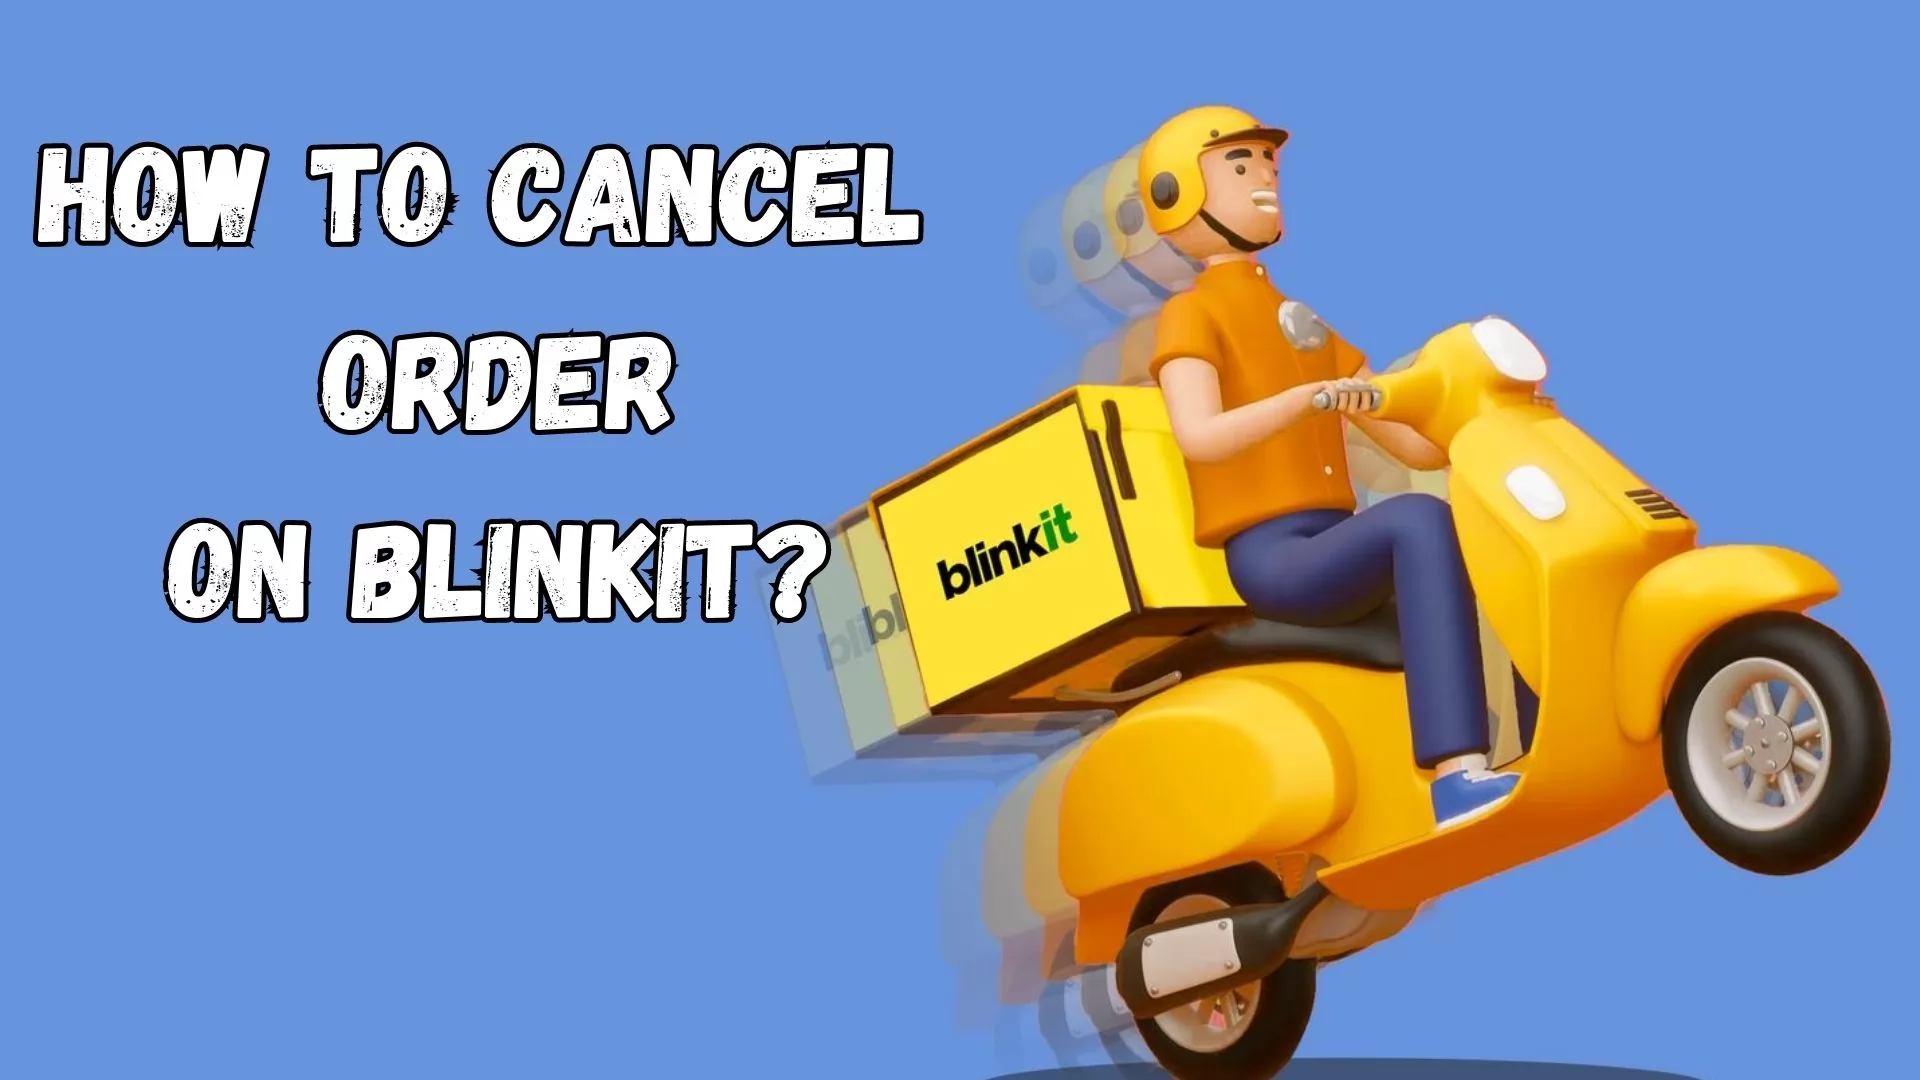 How To Cancel Order On Blinkit?